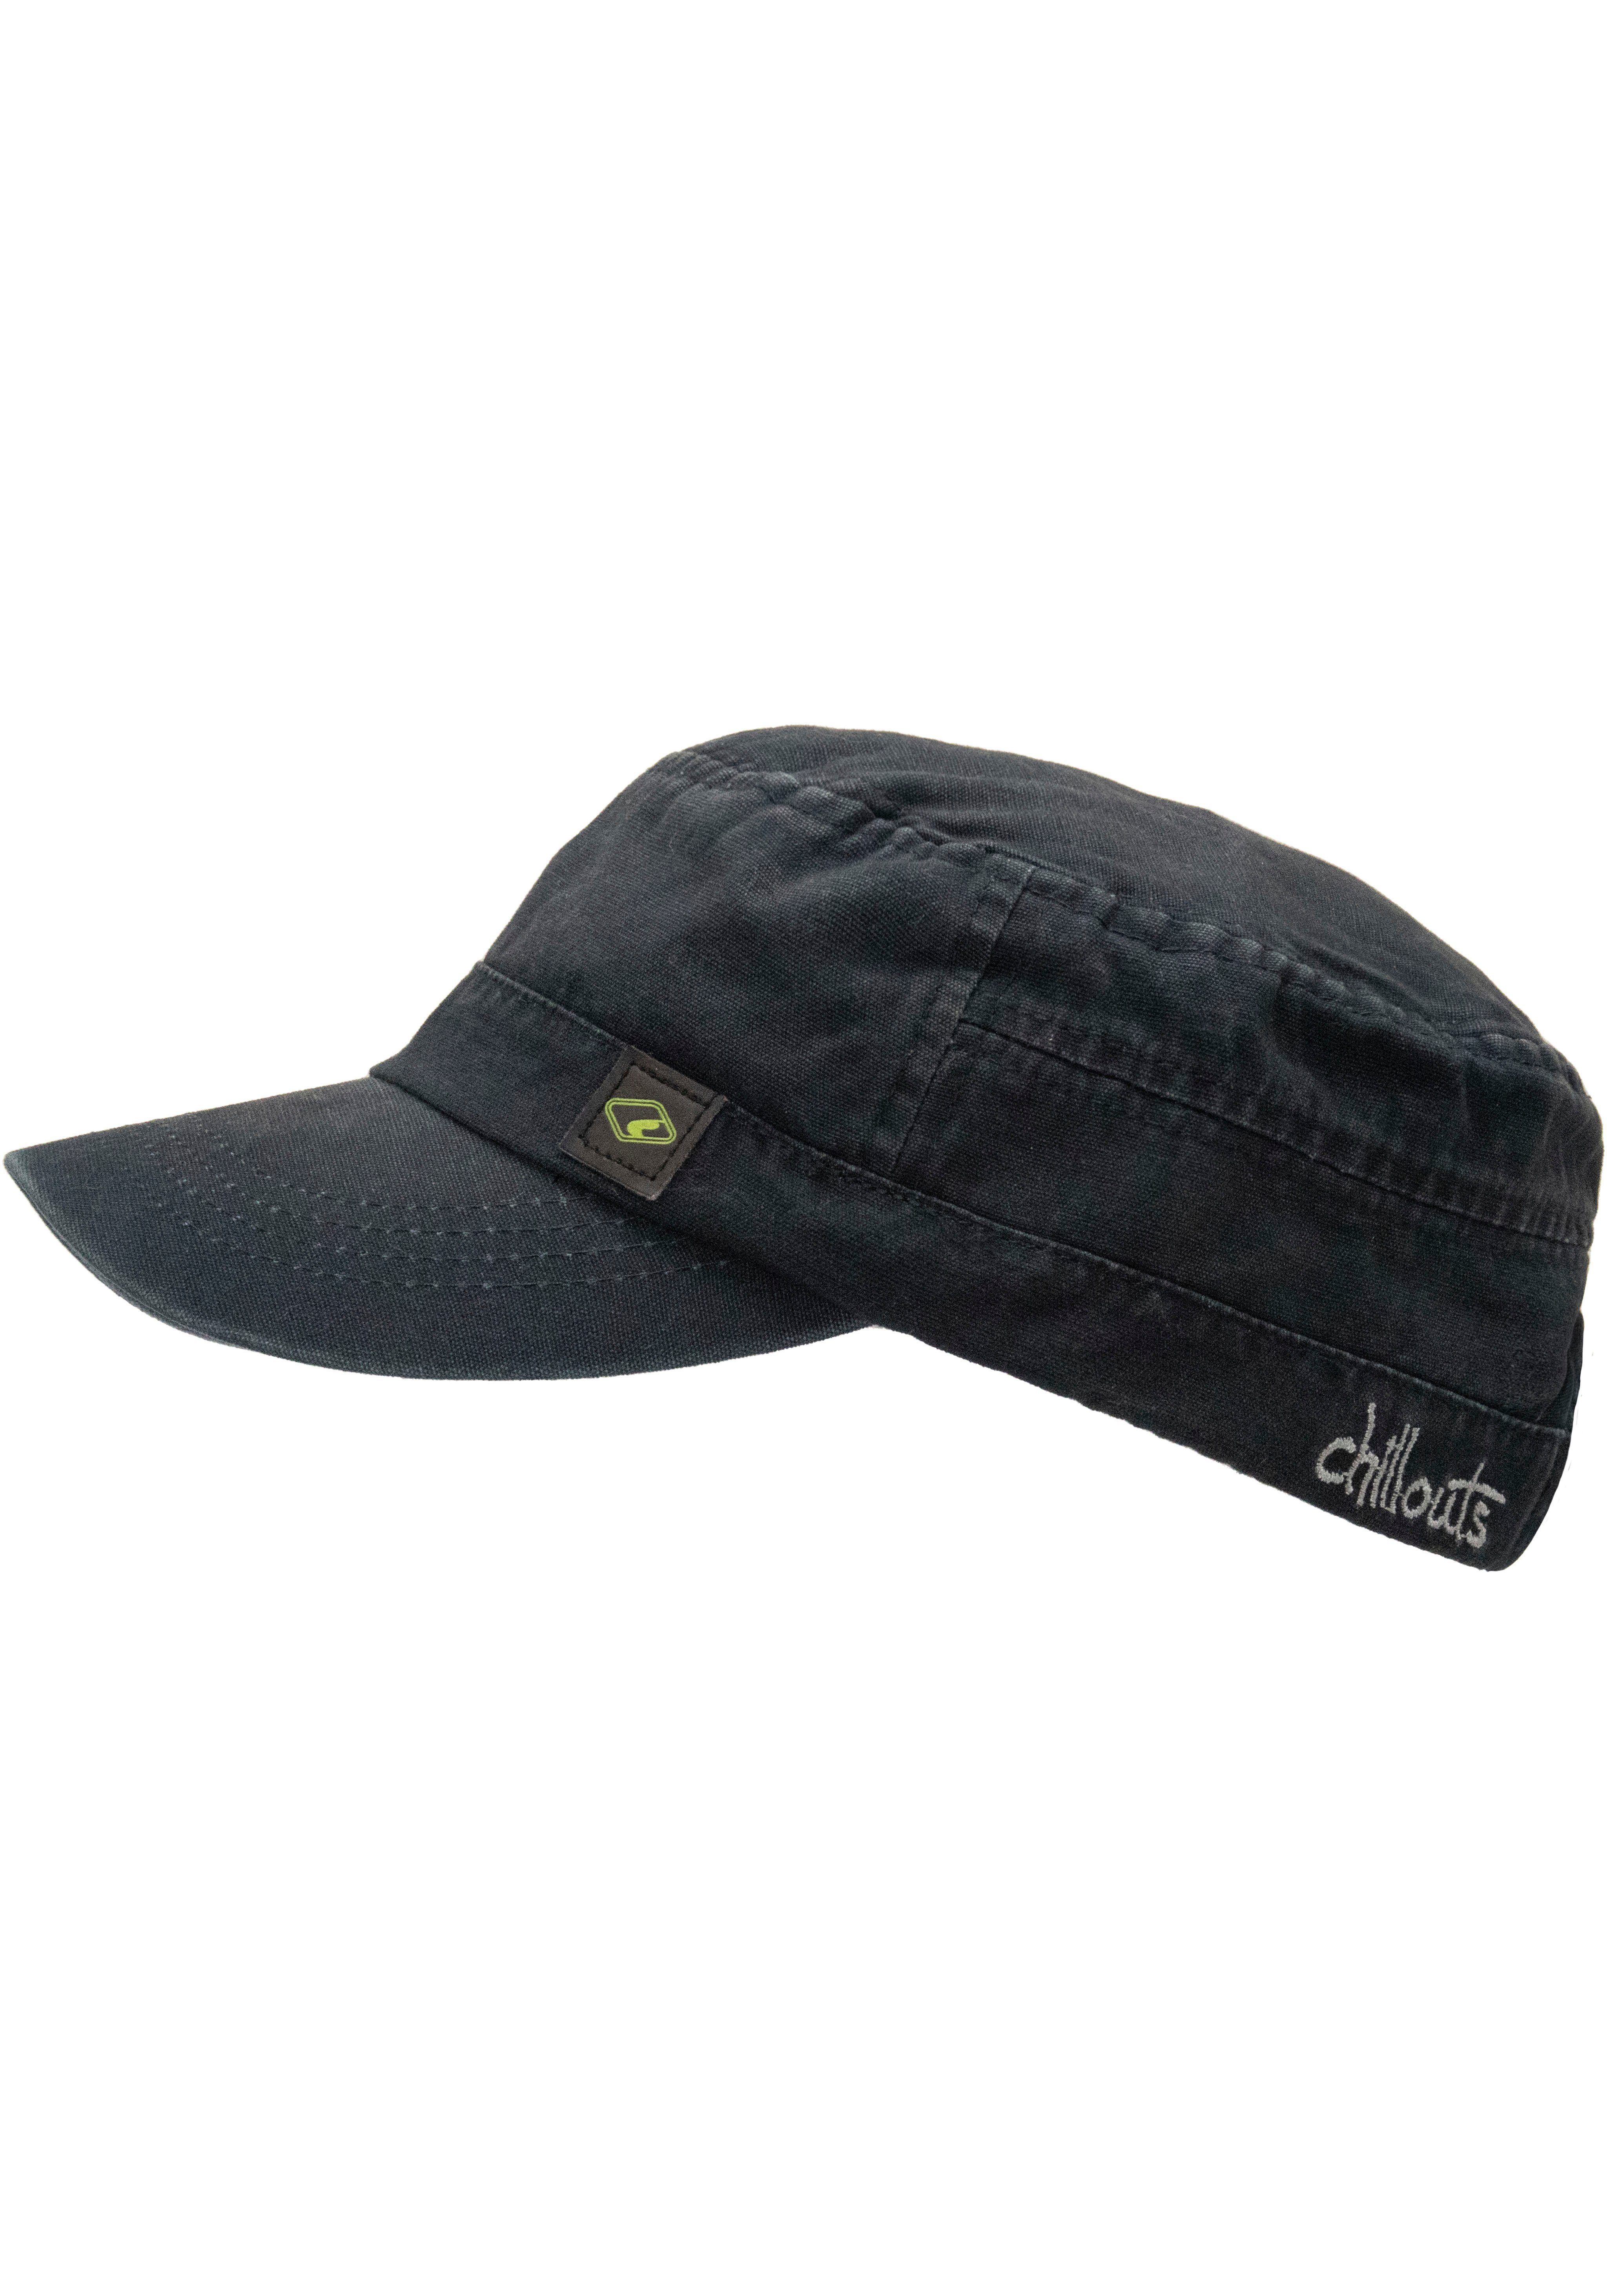 Size Baumwolle, chillouts navy Hat aus El Army atmungsaktiv, reiner washed One Cap Paso